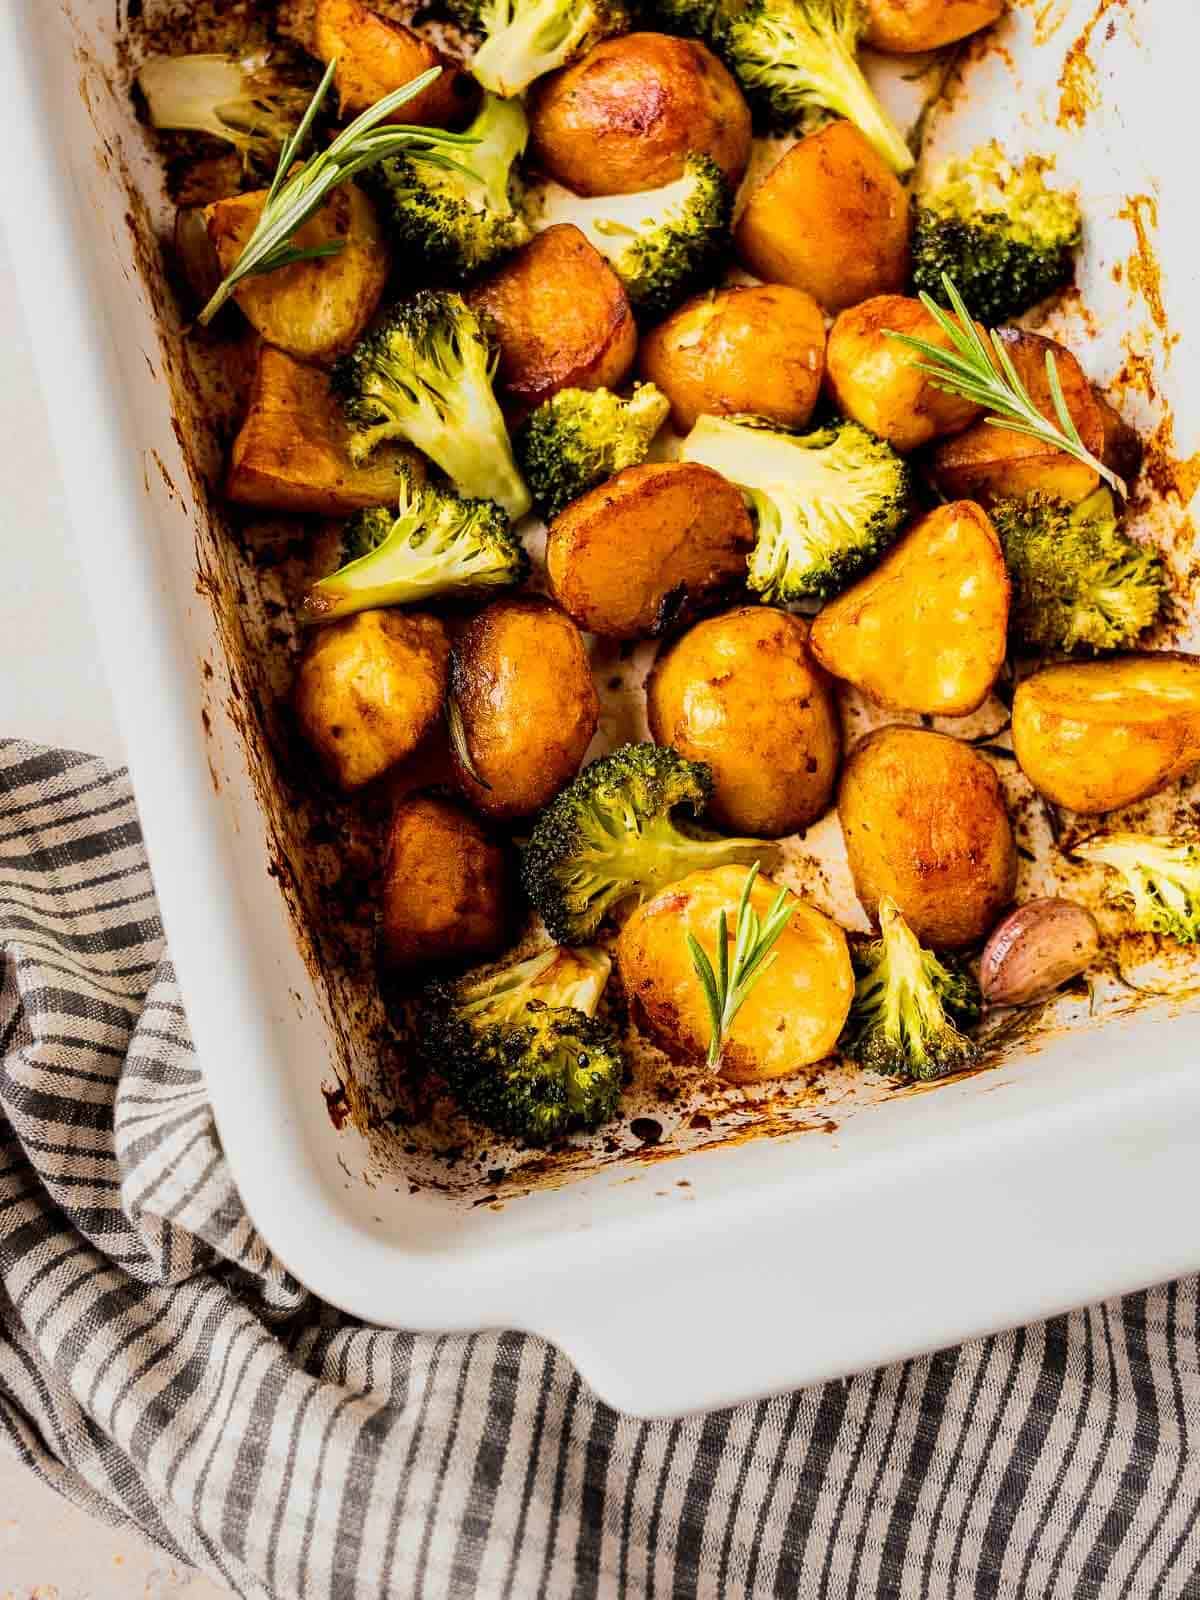 roasted garlic and rosemary potatoes with marmite in white casserole dish.